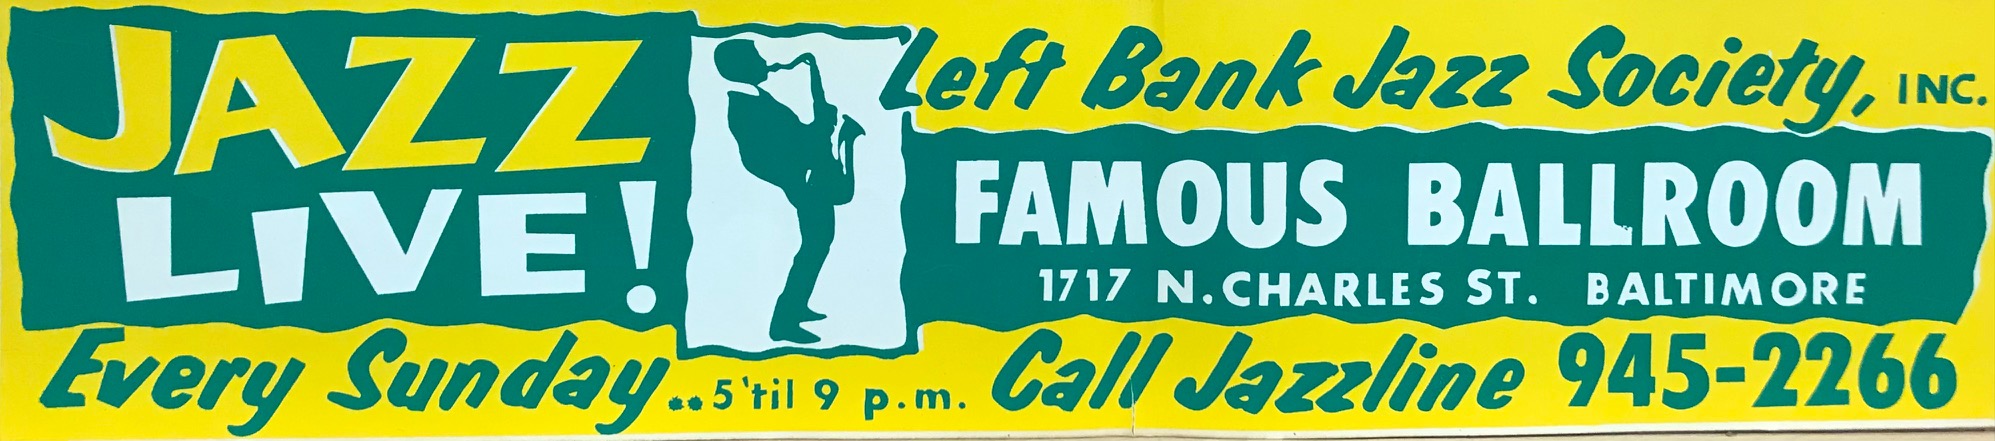 Left Bank Jazz Society Oversize Bumper Sticker. The sticker is yellow with green accents and white, bold font. The text states: "Jazz Live! Left Bank Society, Incorporated. Famous Ballroom 1717 North Charles Street Baltimore. Every Sunday..5 'til 9 p.m. Call Jazzline 945-2266"